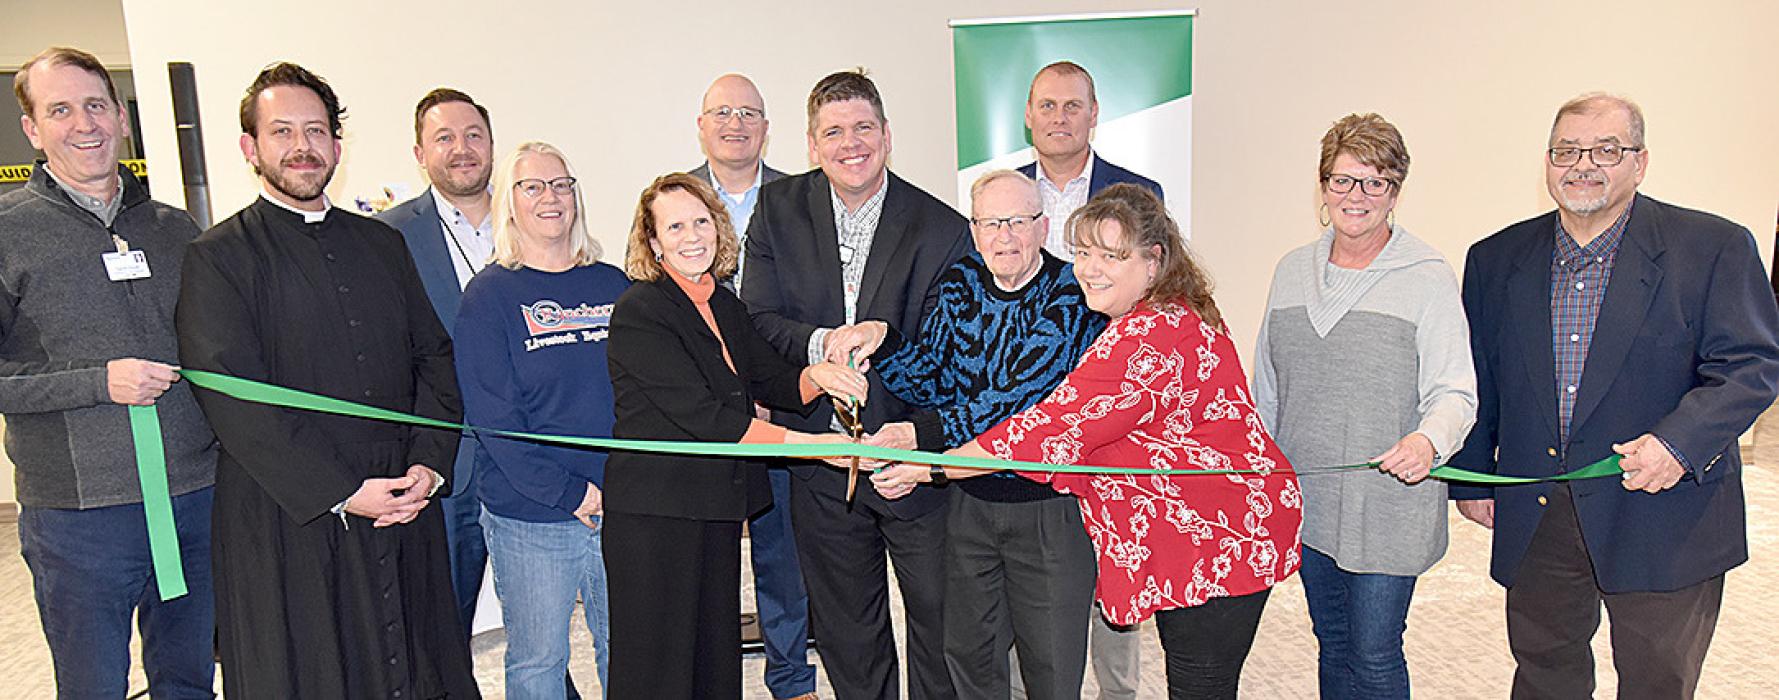 The new Avera Gregory medical campus celebrated an open house and blessing ceremony in November to give the community a preview of the new facility. Move-in is expected in January.